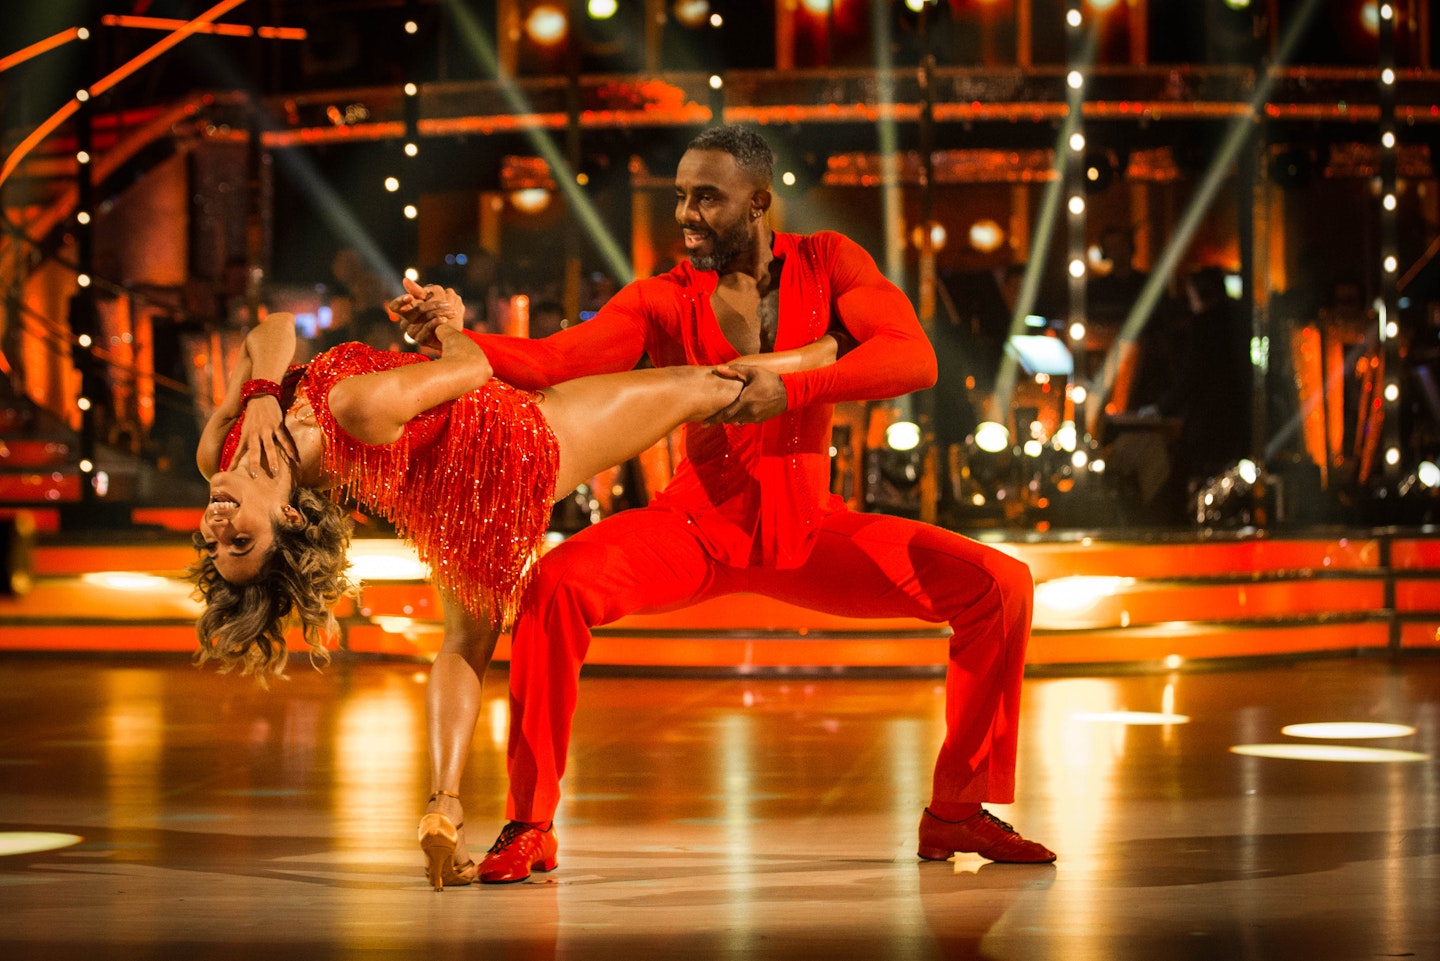 Strictly Come Dancing 2018 Songs And Dances Revealed For Week 2